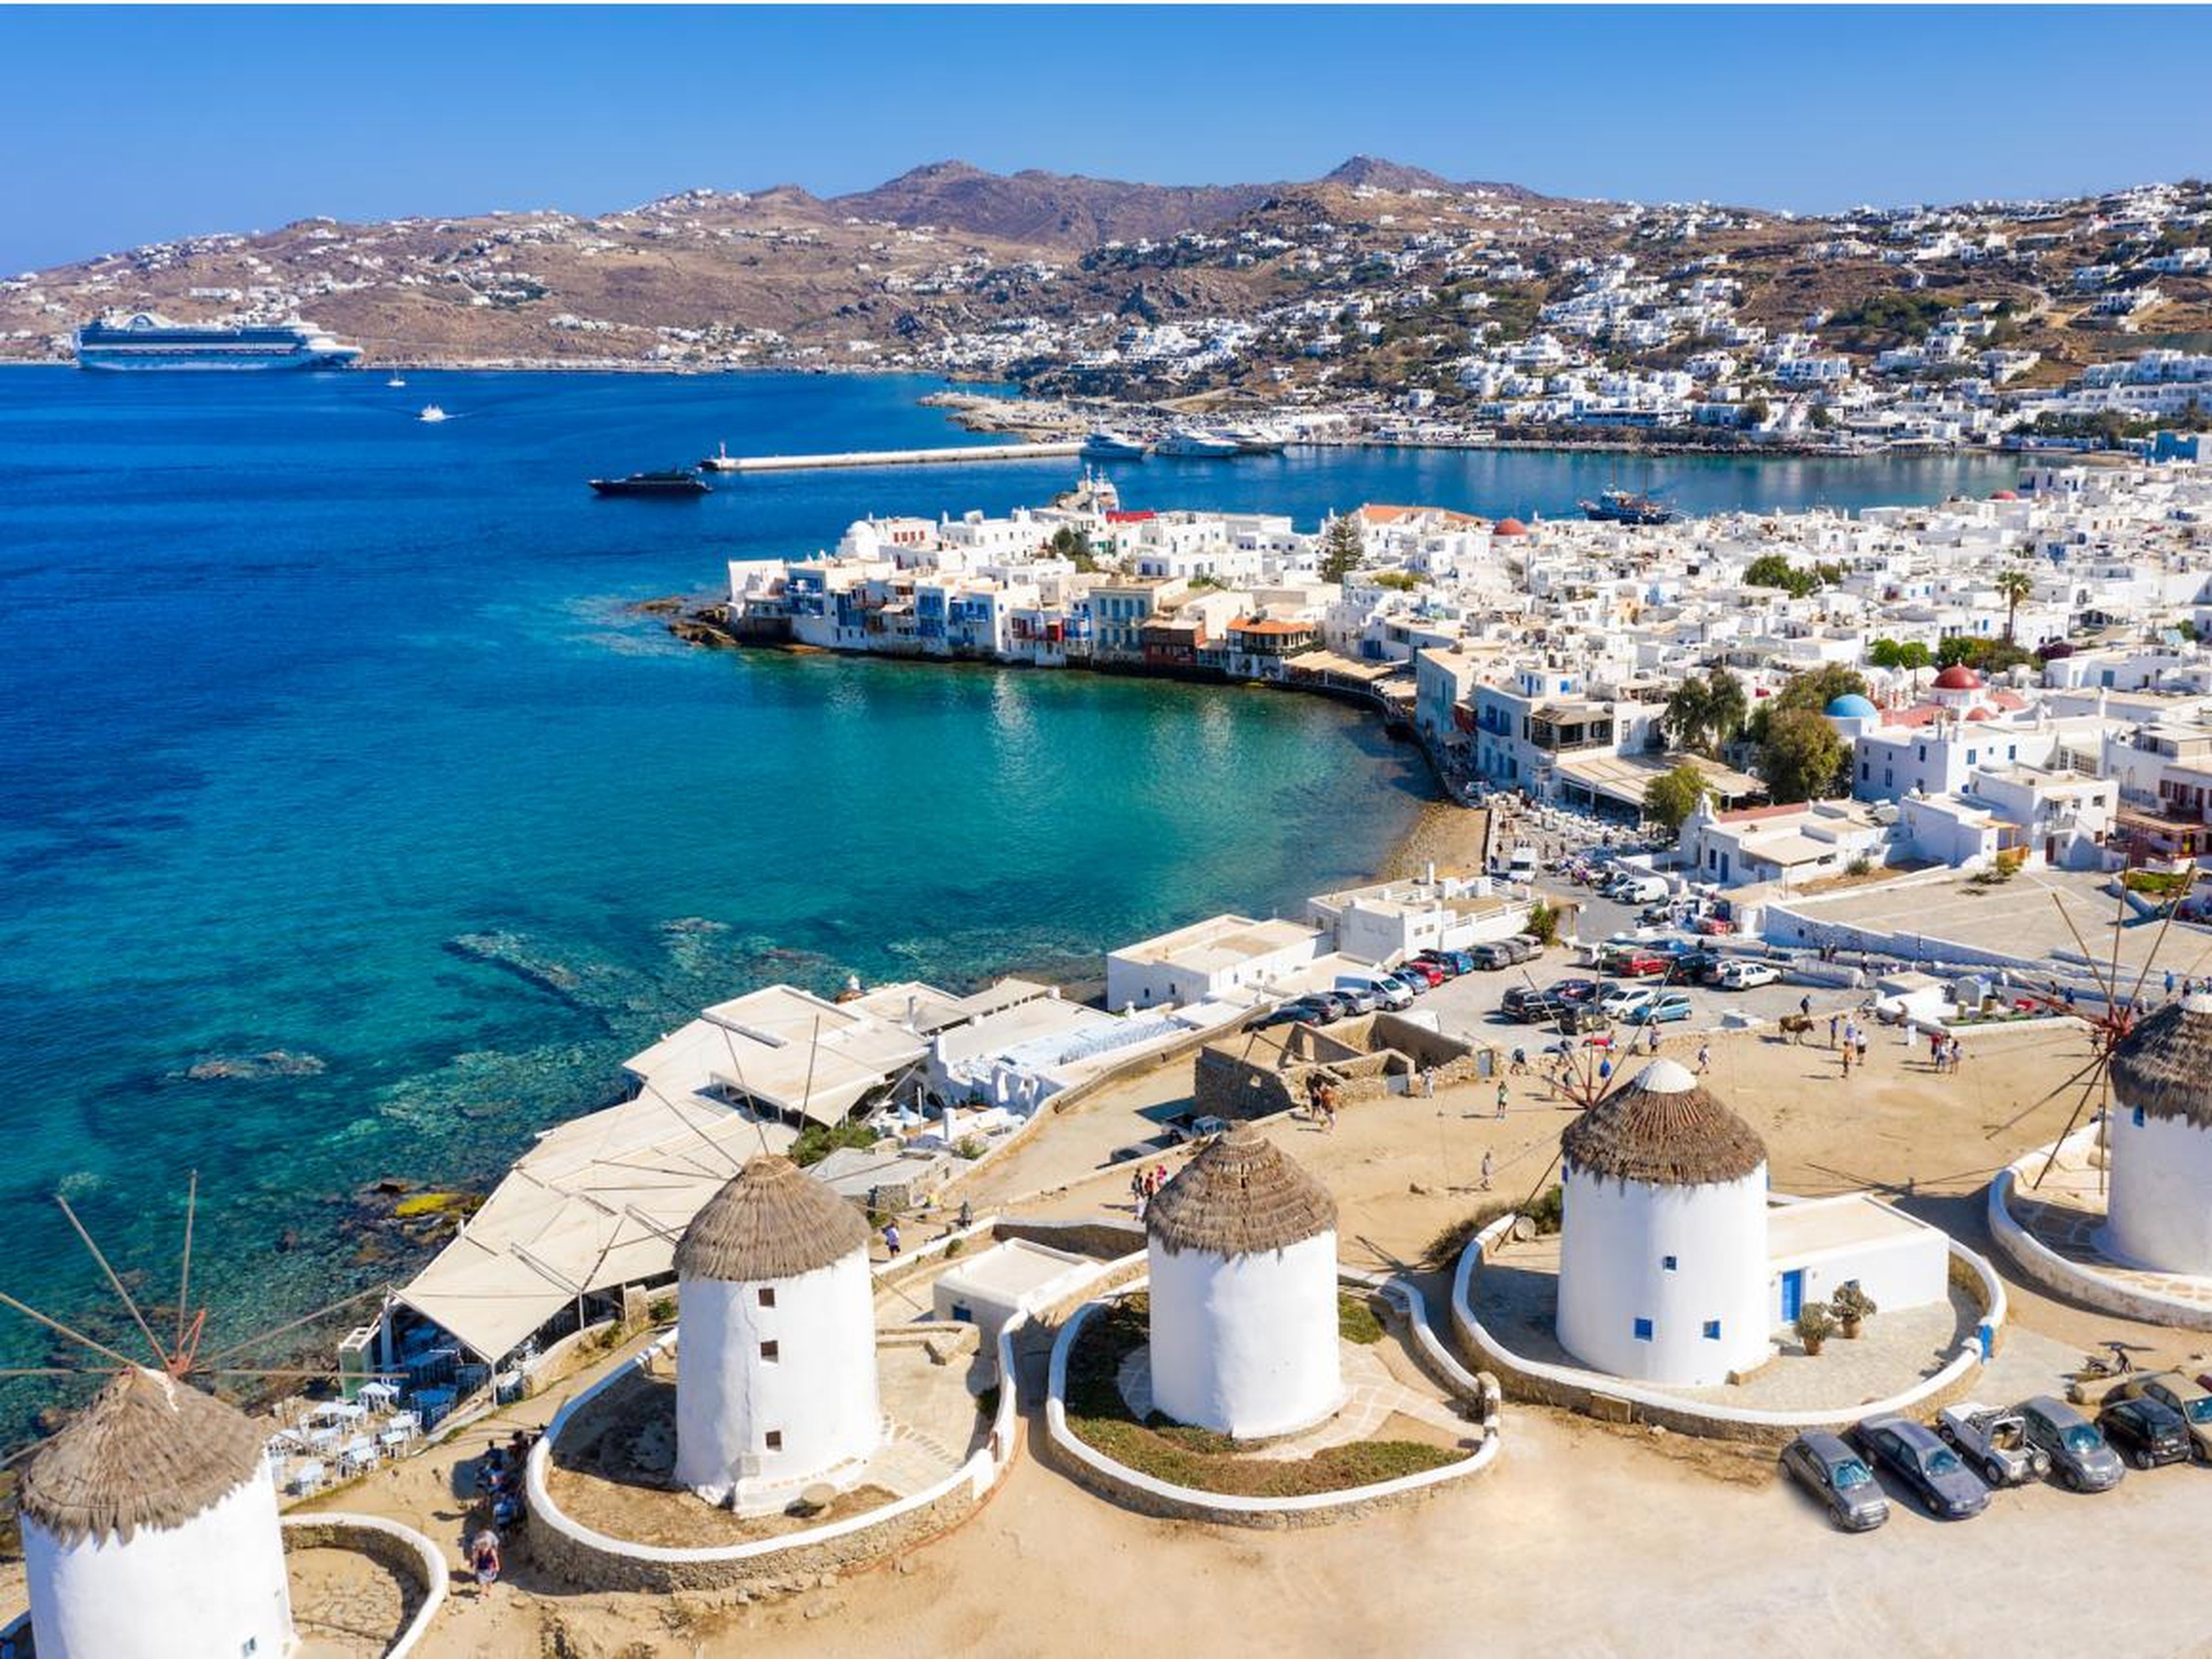 One of the places I was most excited to visit was the Greek isle of Mykonos, known as a party capital and vacation hot spot for billionaires.